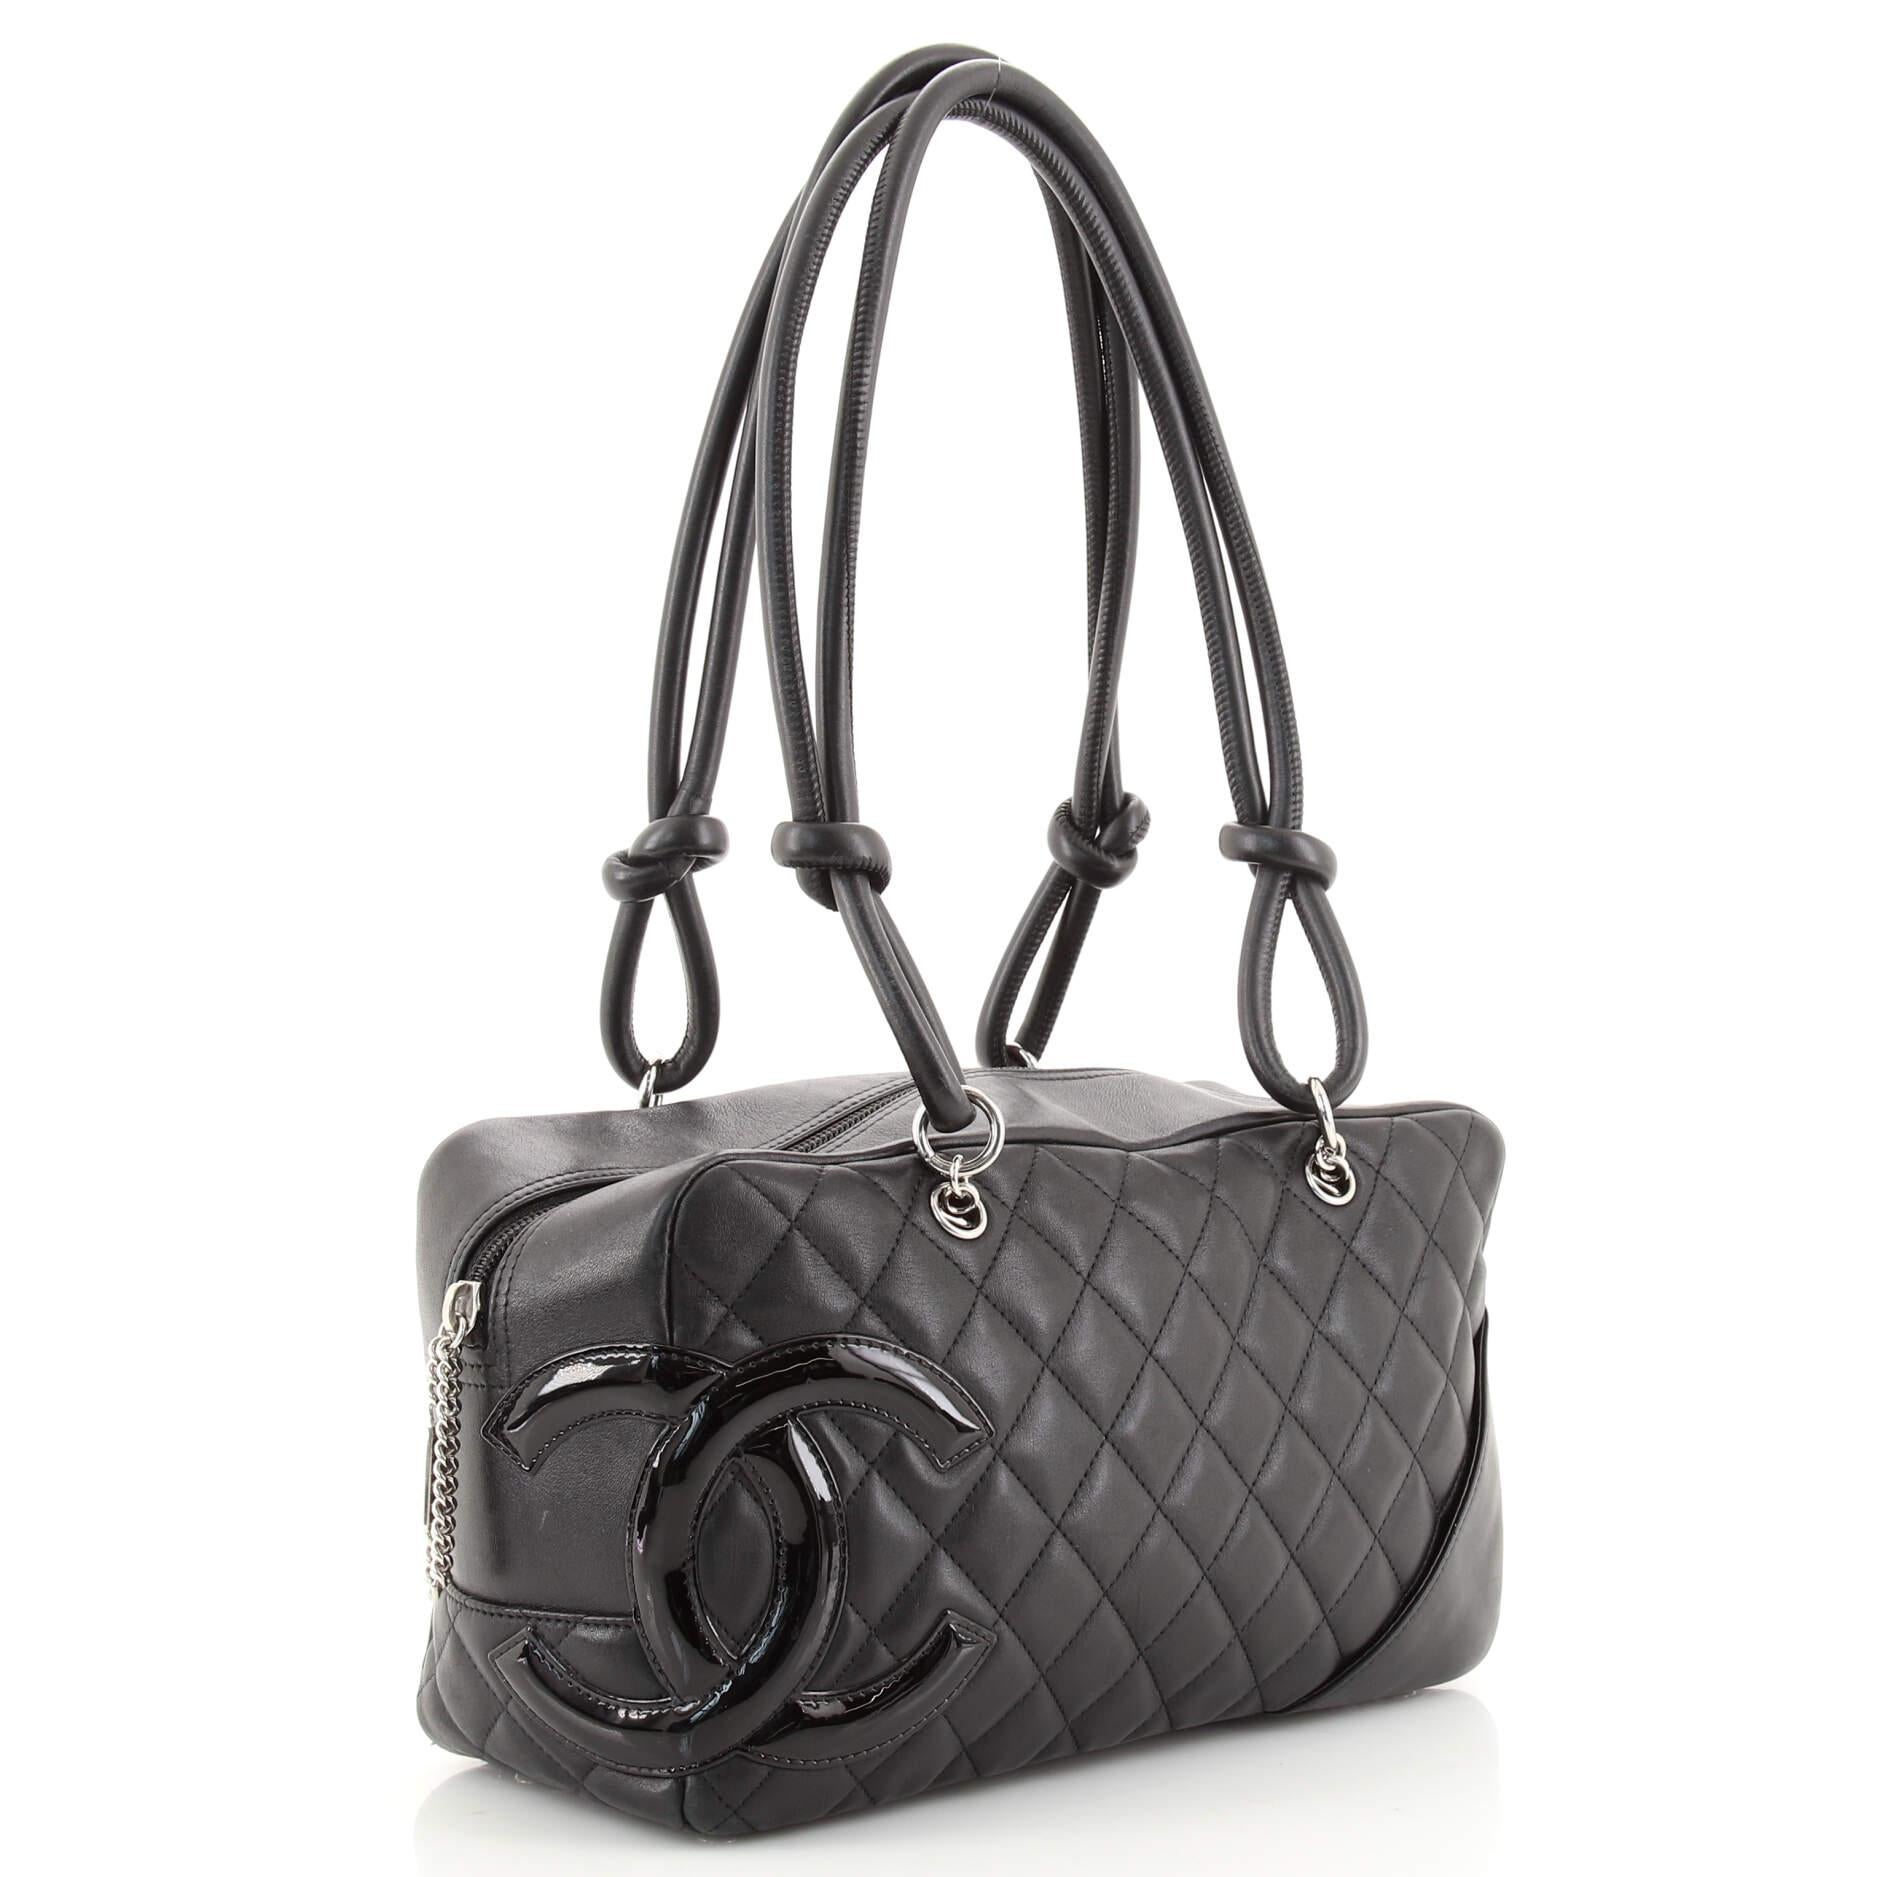 Black Chanel Cambon Bowler Bag Quilted Leather Medium